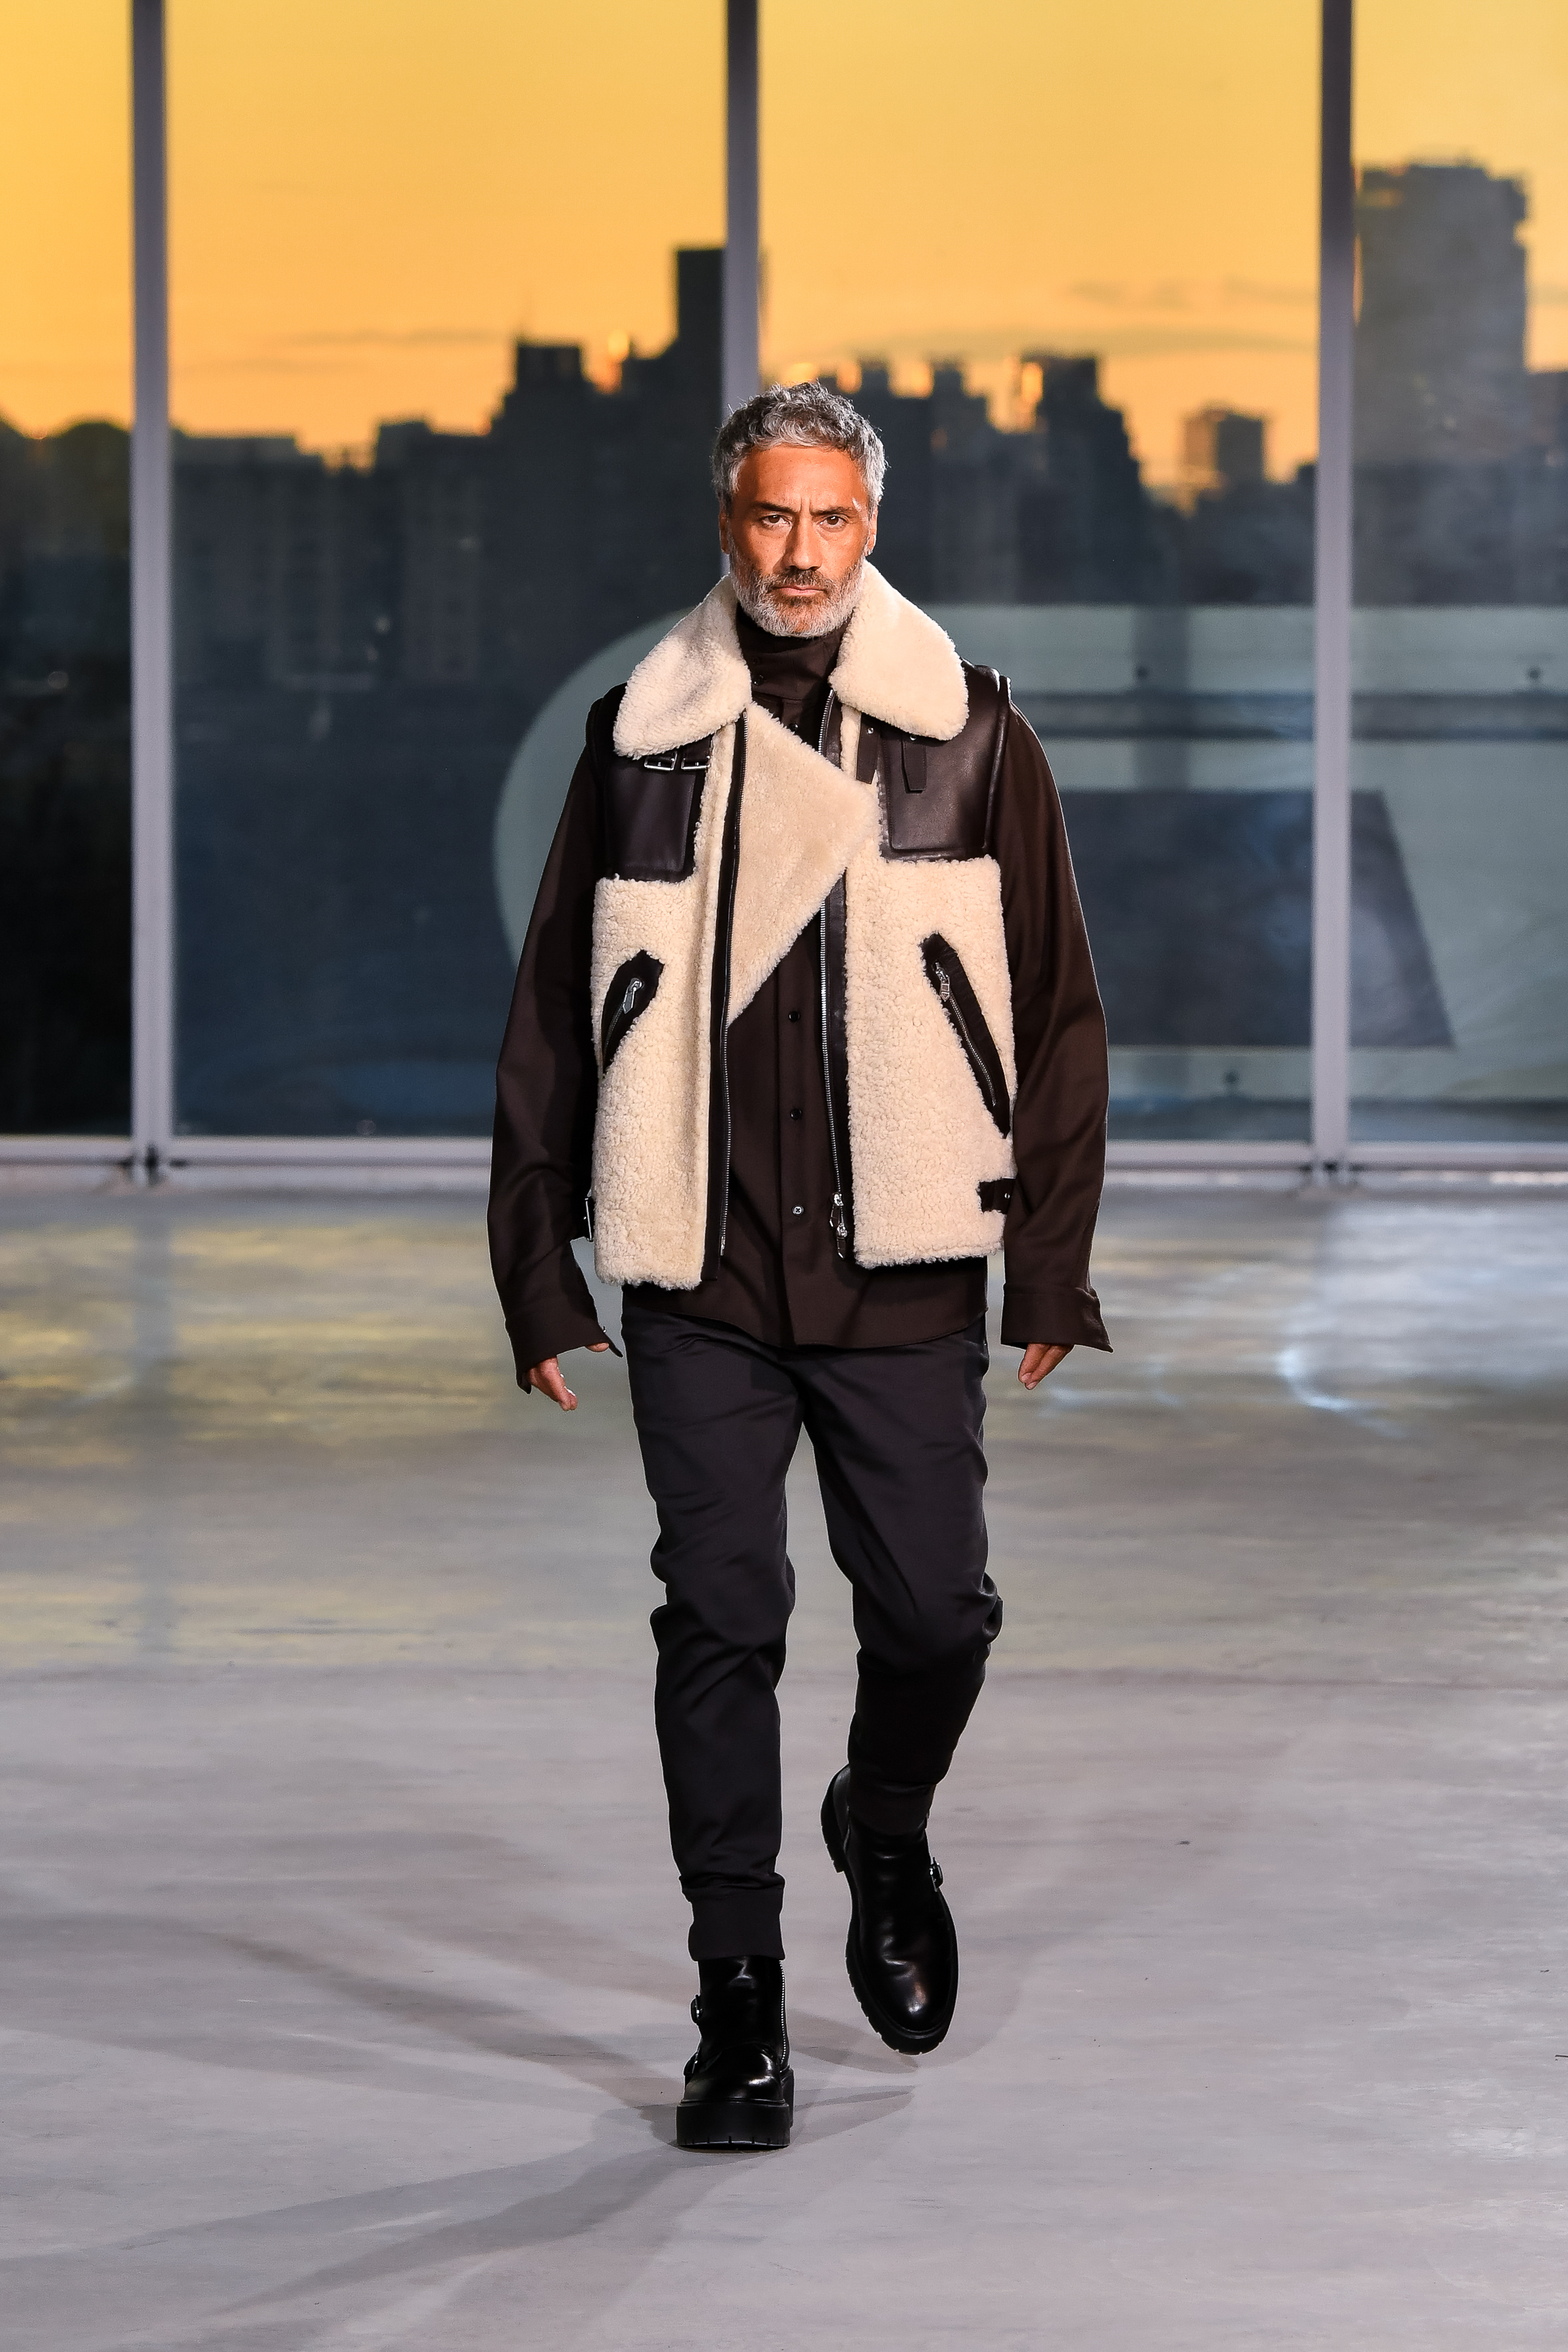 A Look at the Hermes Men's Autumn-Winter 2023 Collection